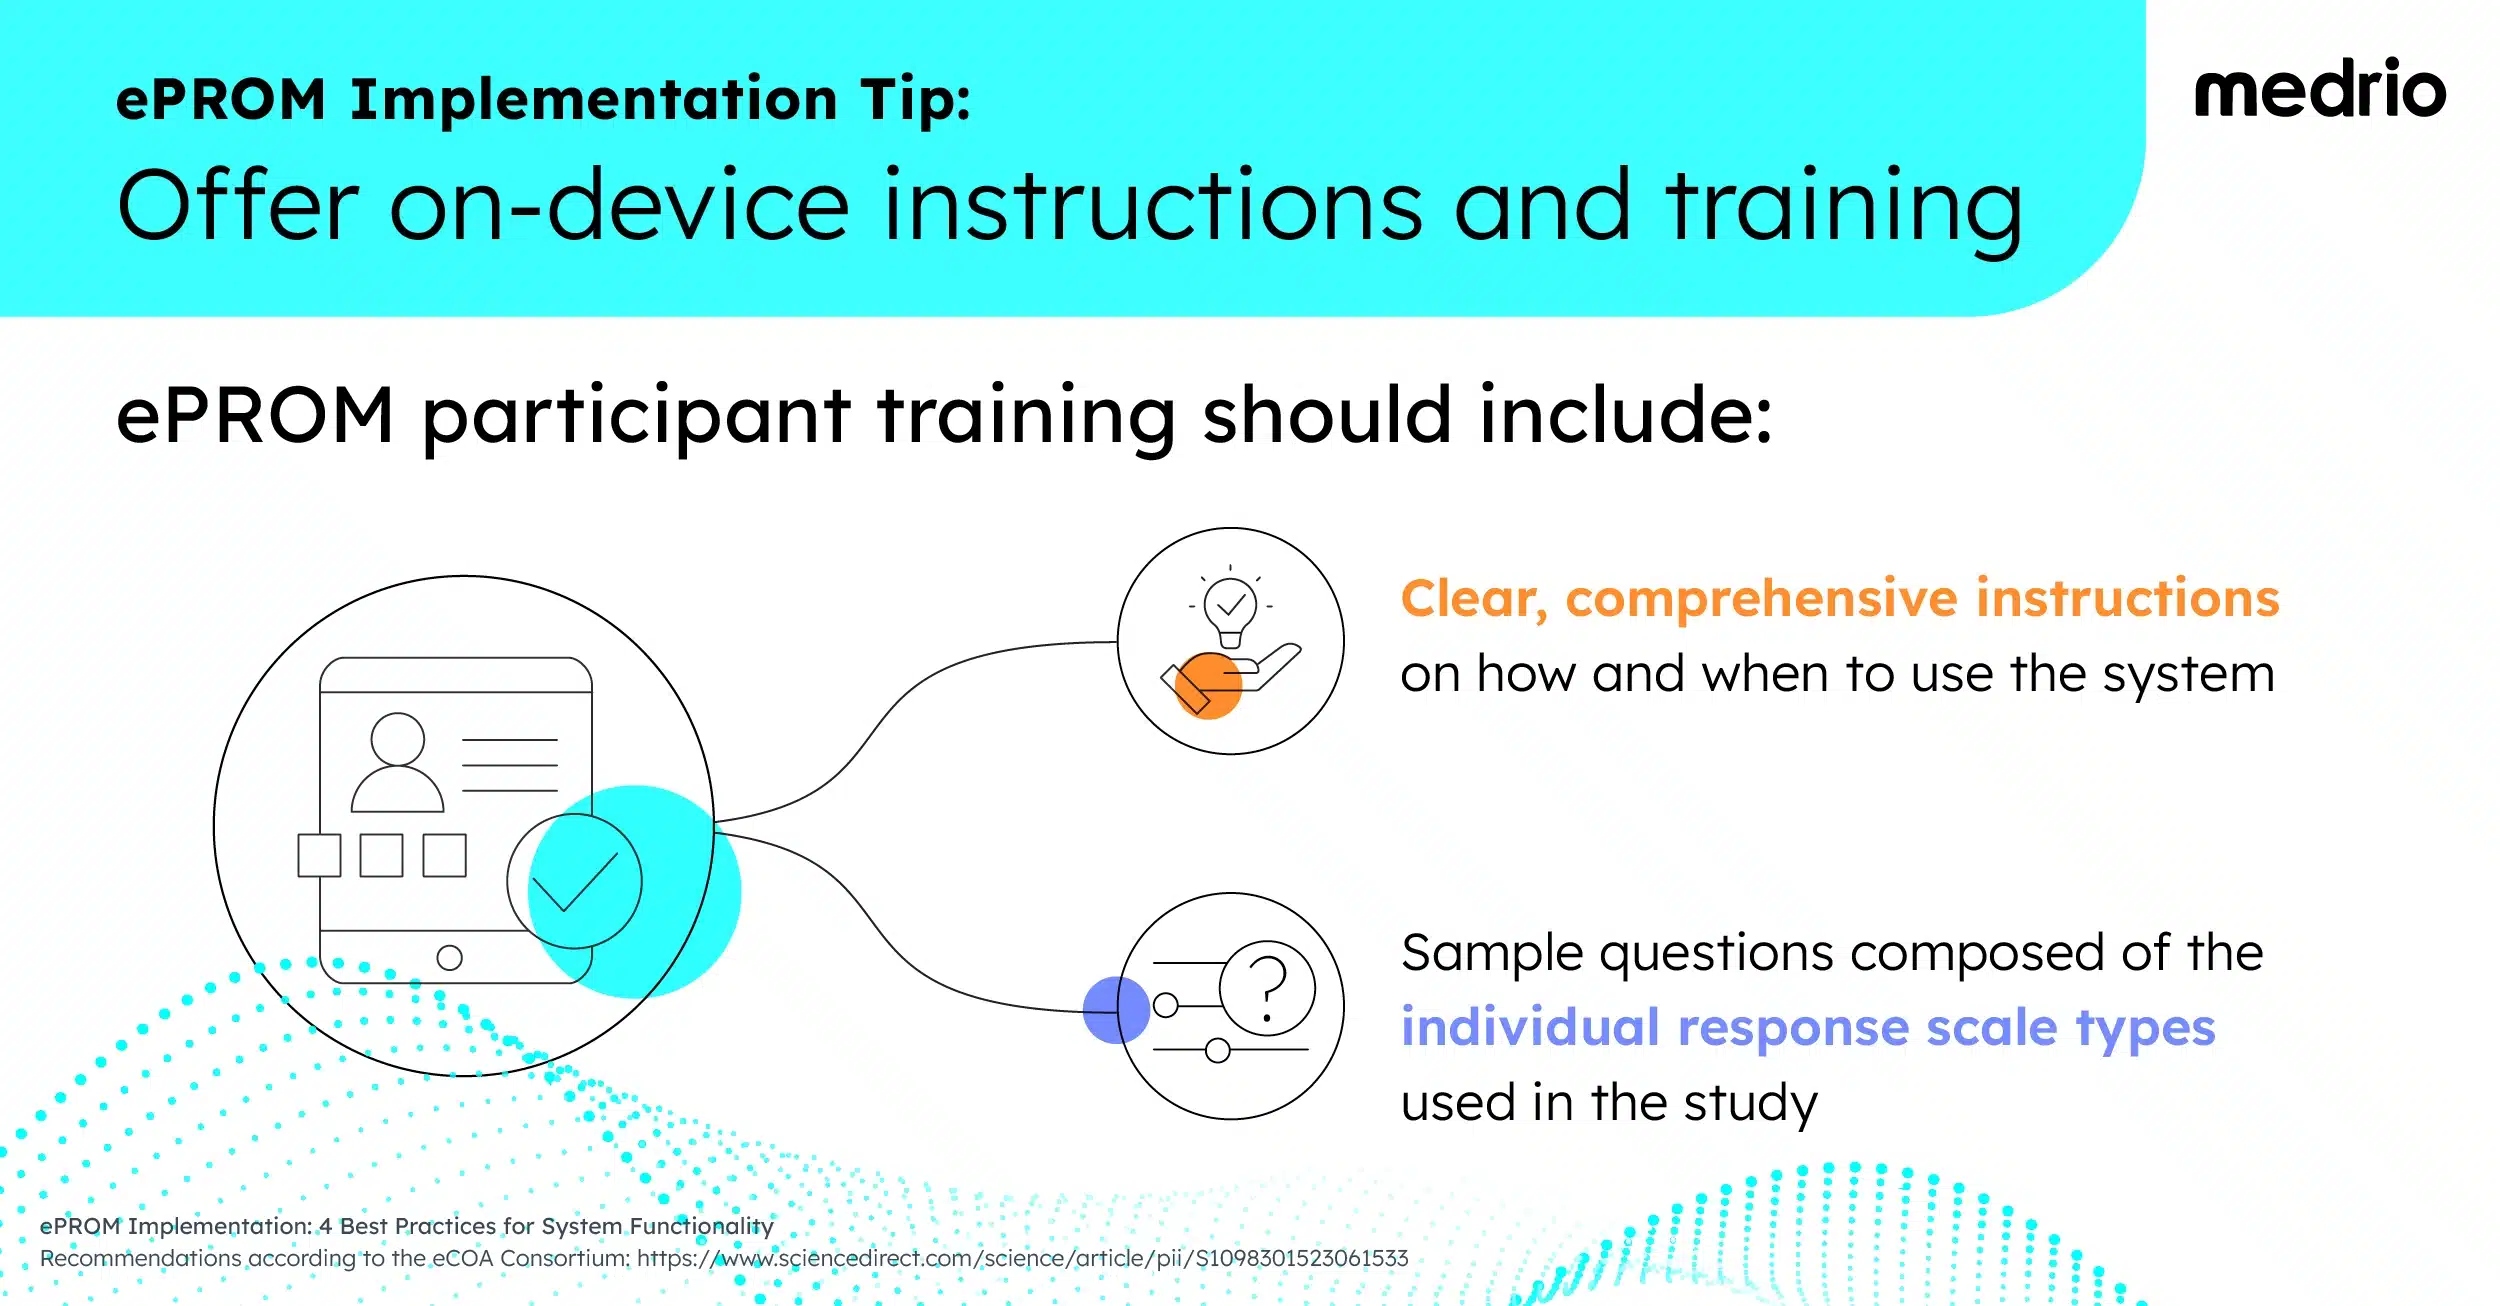 Visual representation of ePROM implementation tip to offer on-device instructions and participant training